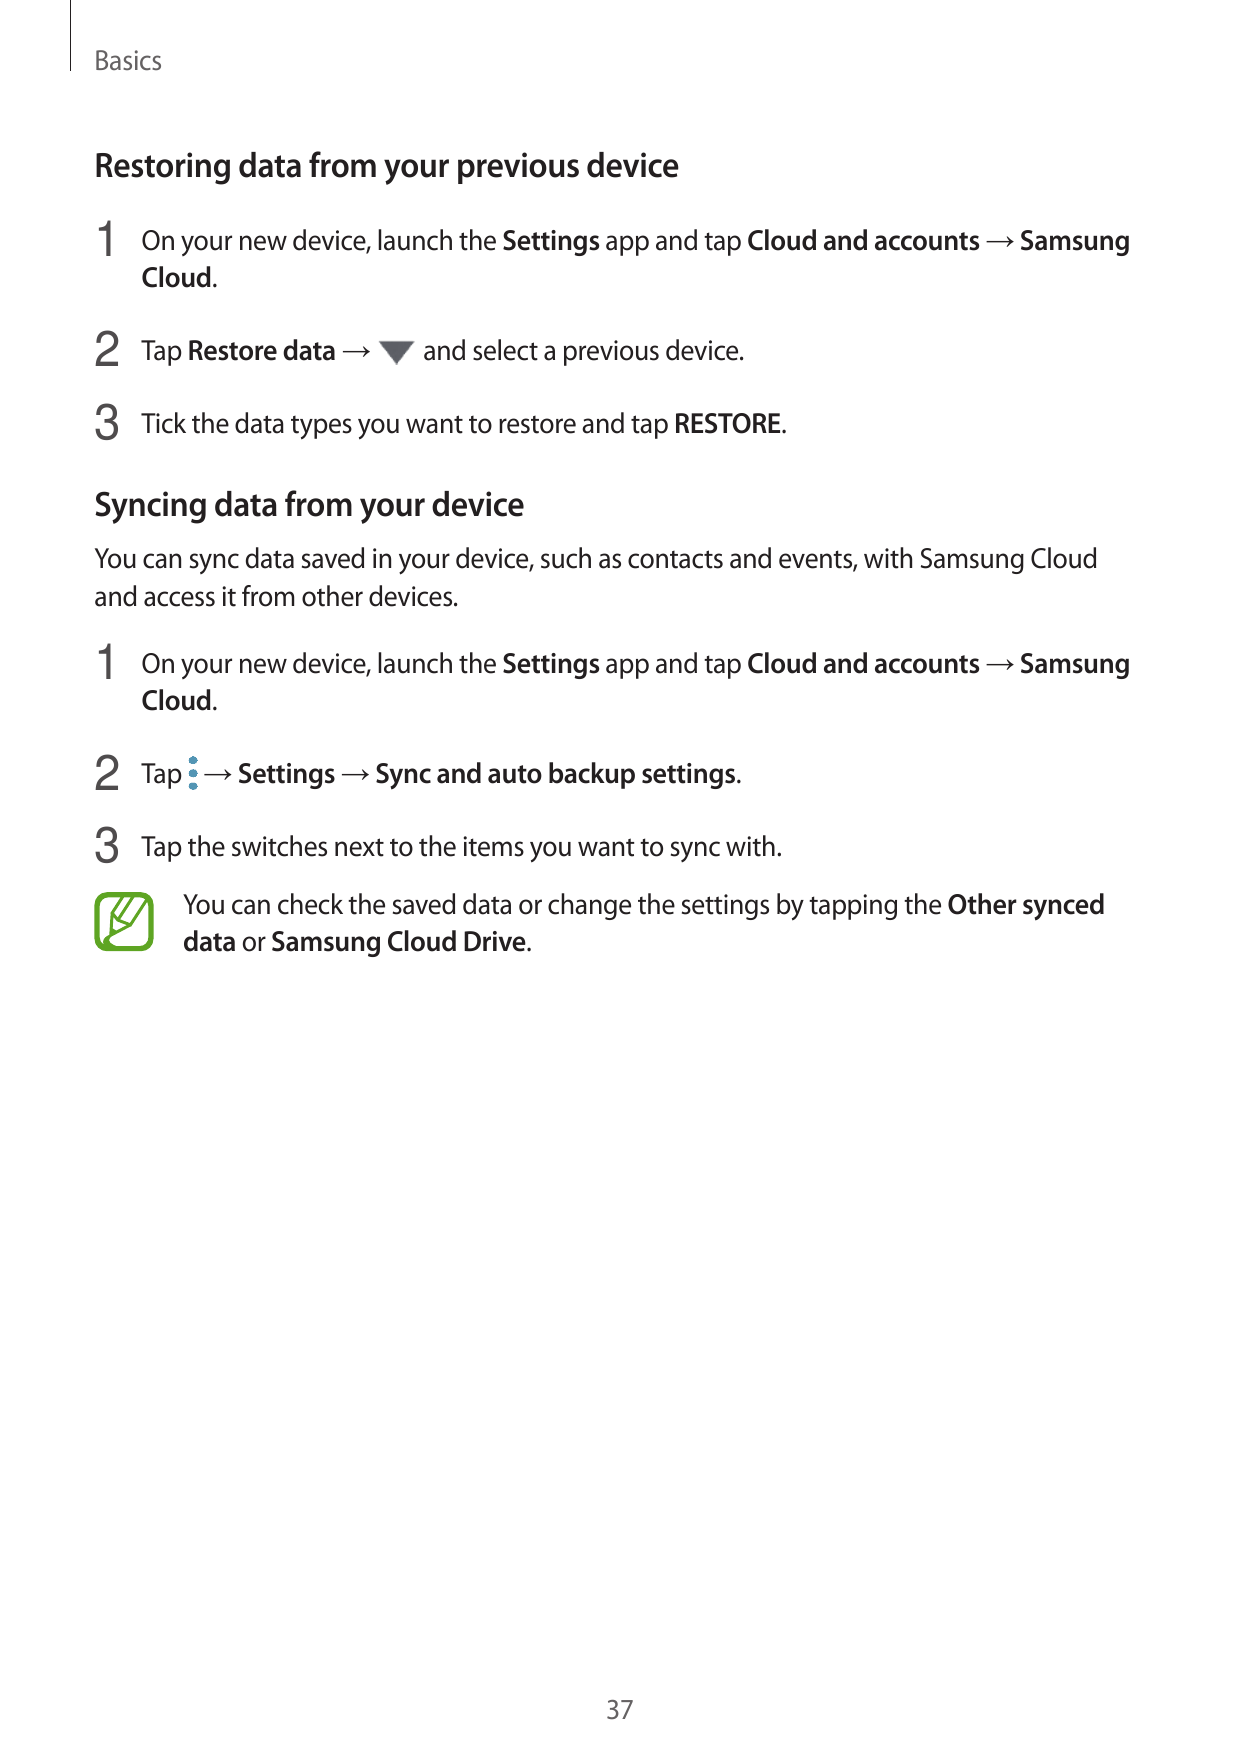 BasicsRestoring data from your previous device1 On your new device, launch the Settings app and tap Cloud and accounts → Samsung